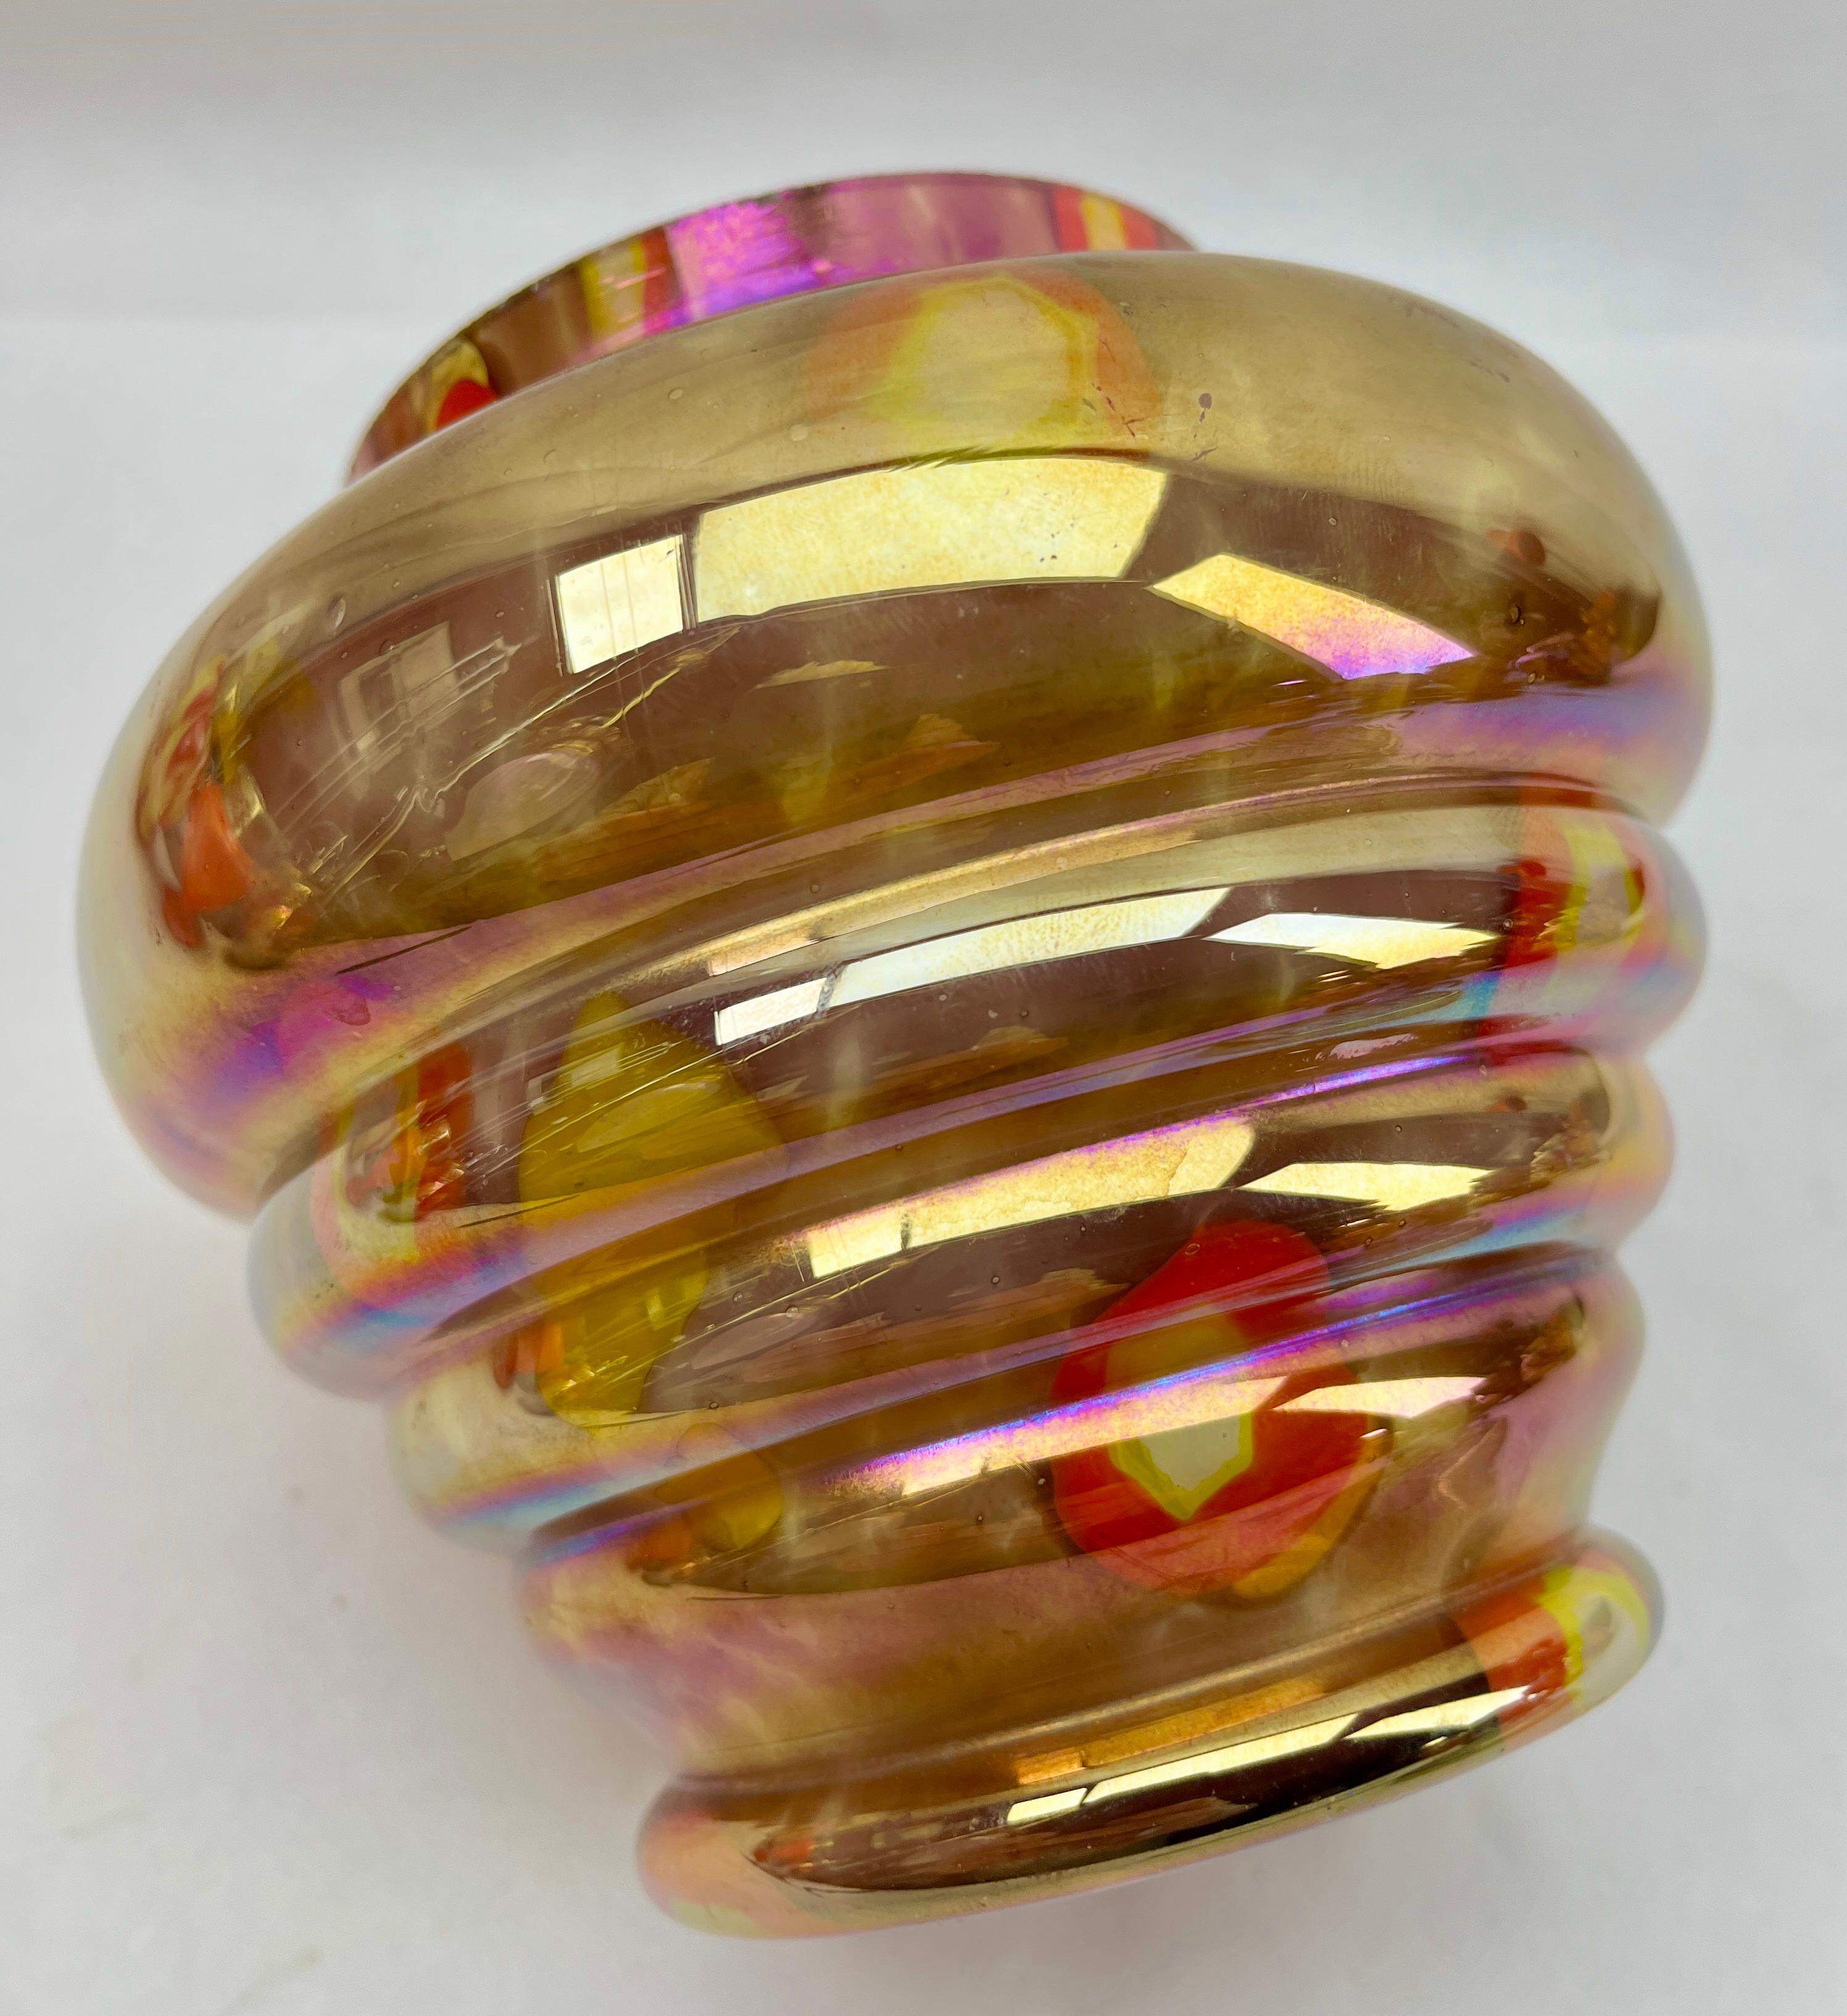 Czech 'Pique Fleurs' Iridescent Glass Vase, in Multi Color Decor with Grille, 1930s  For Sale